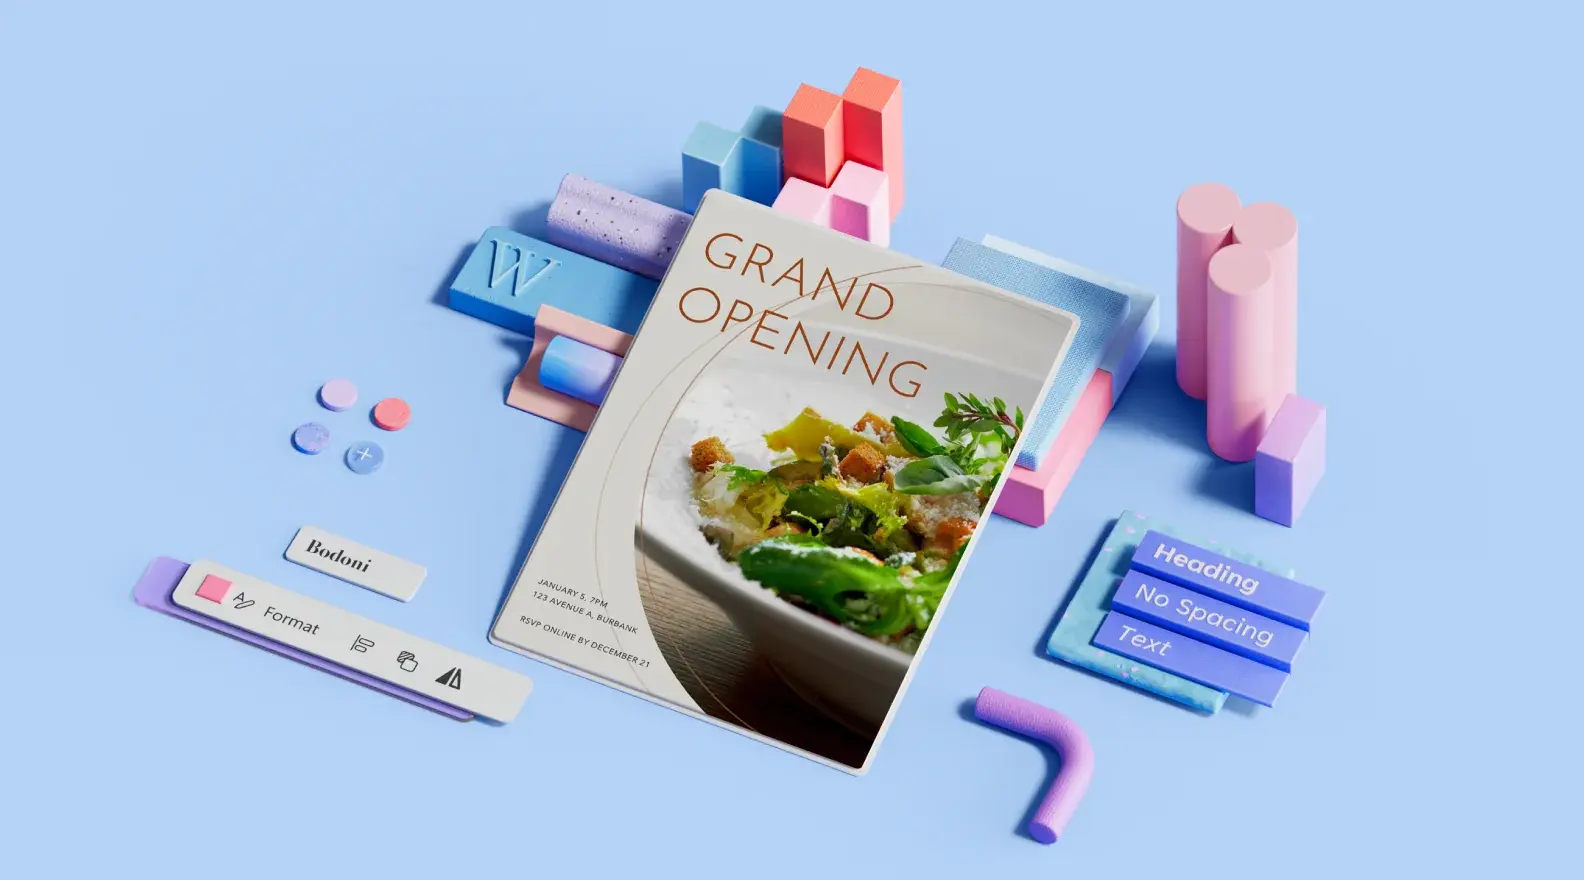 Grand opening poster template surrounded by 3D design elements